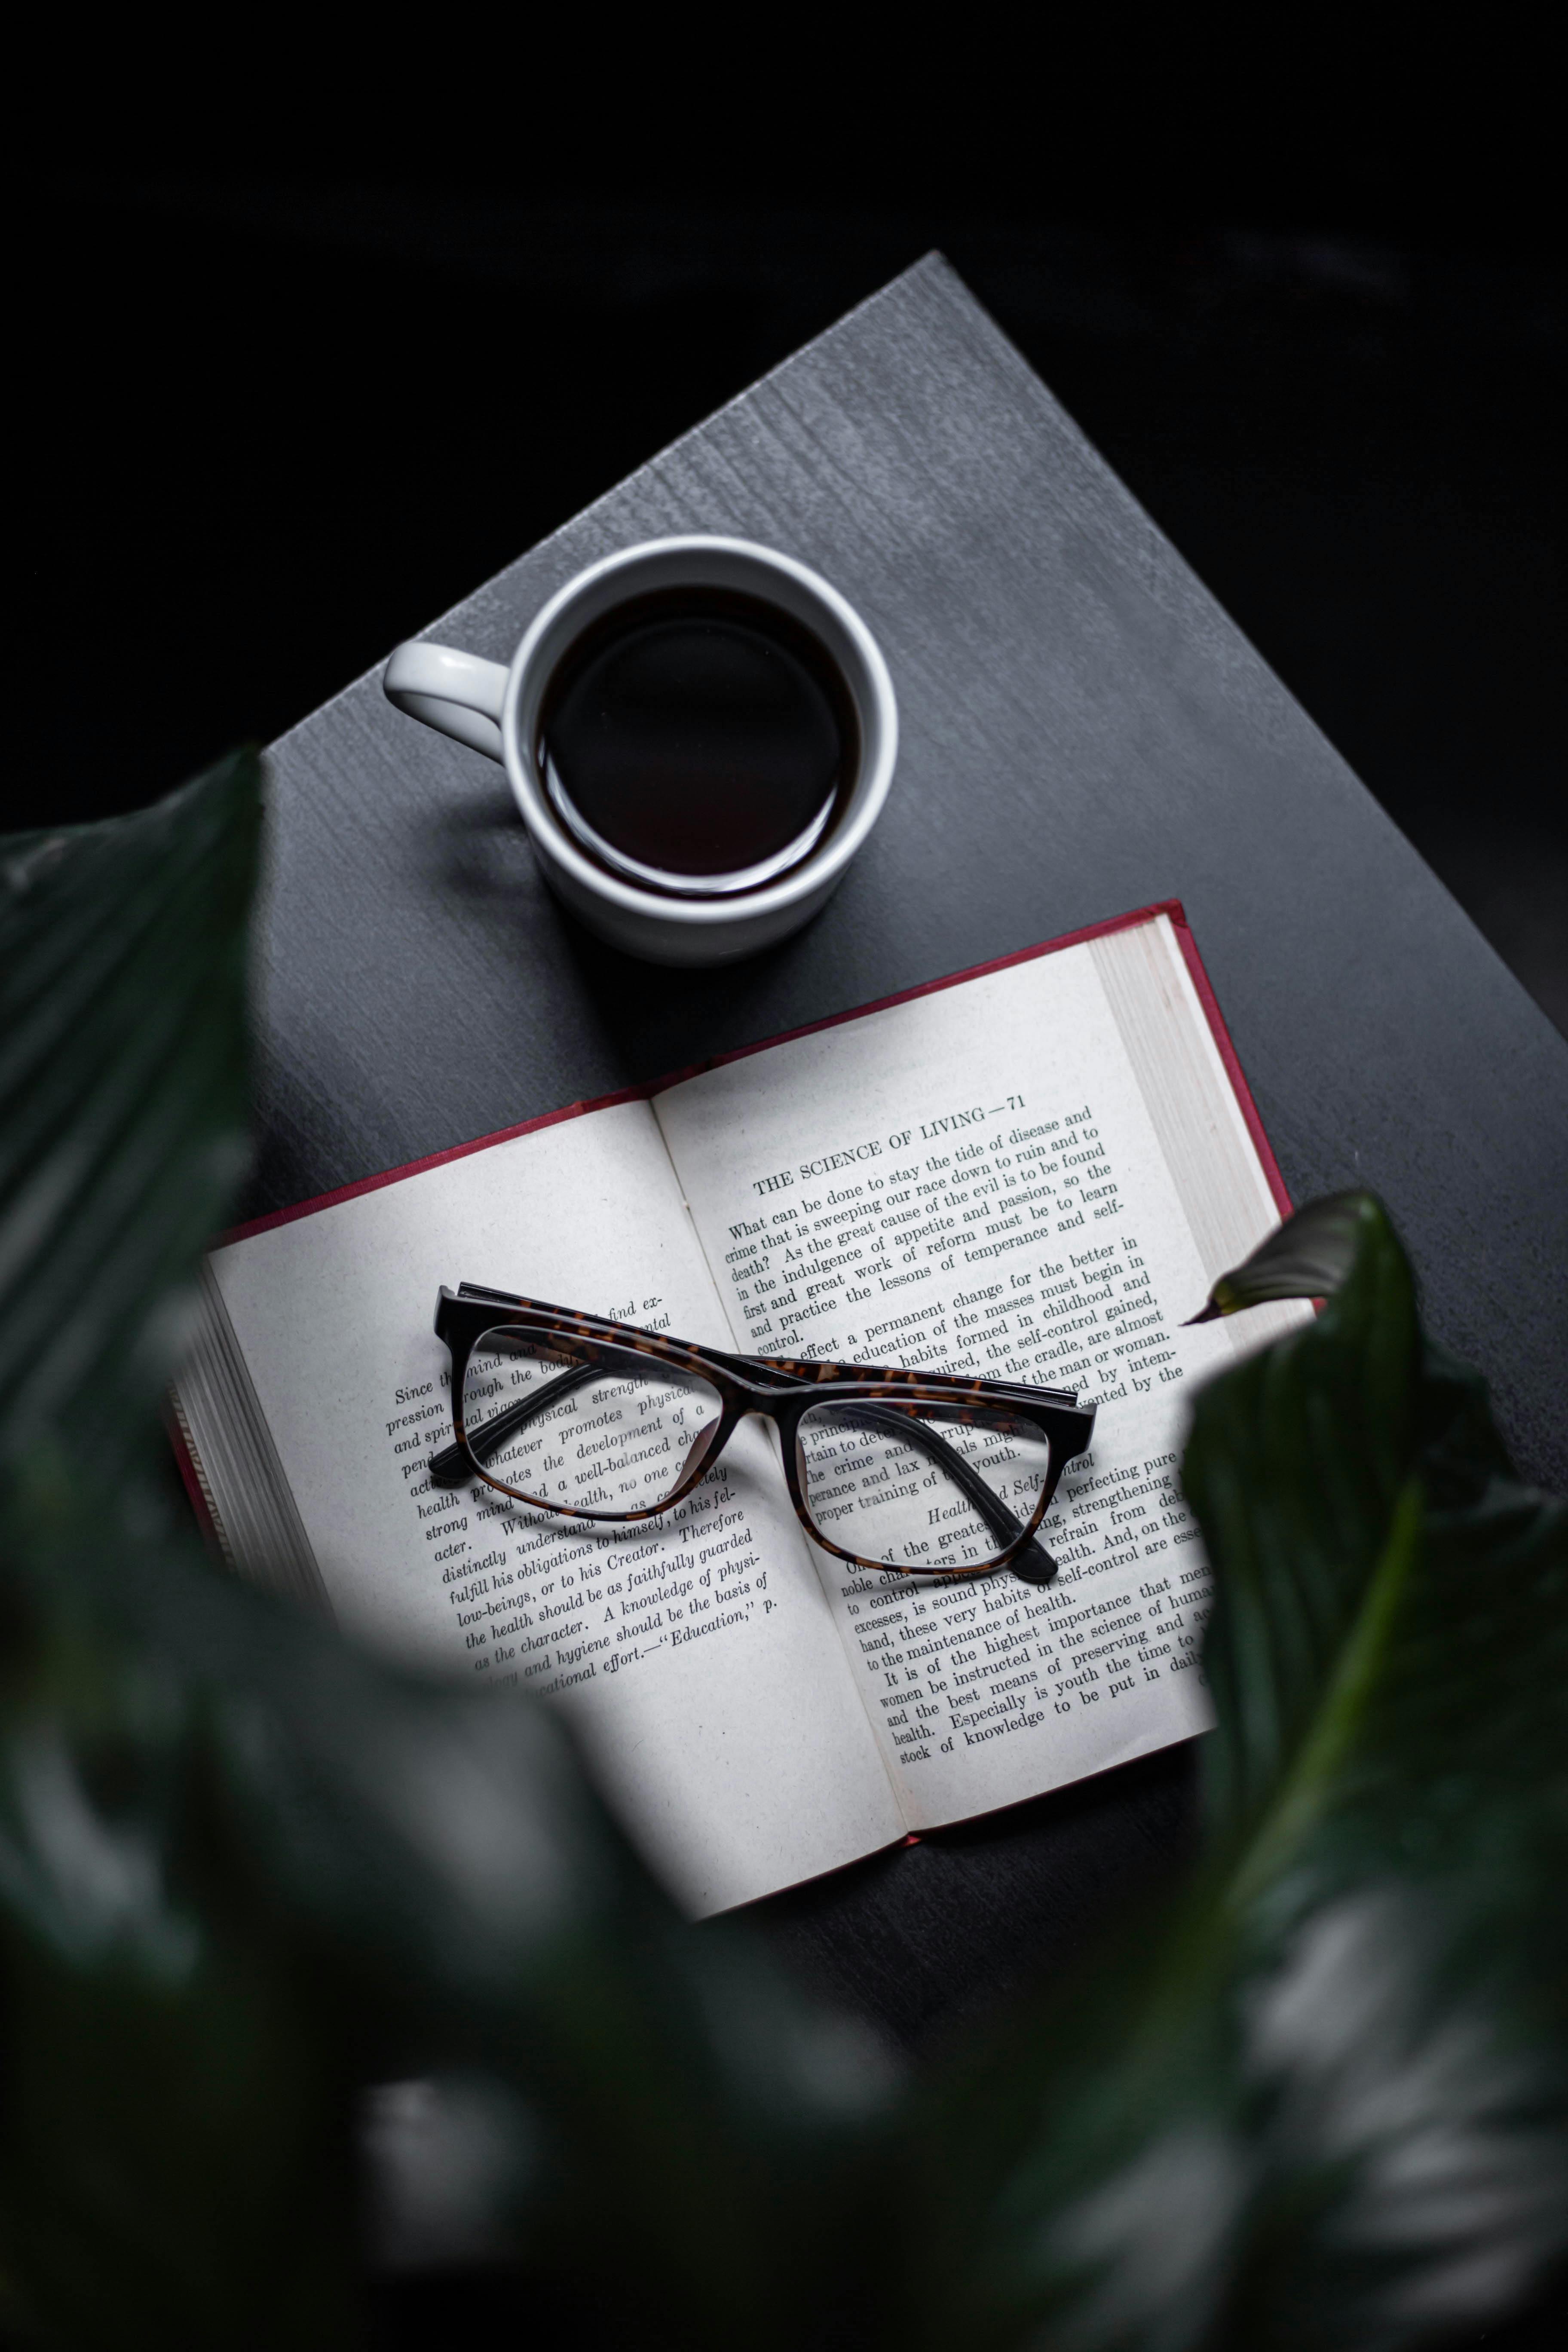 A book and a cup of coffee | Source: Pexels